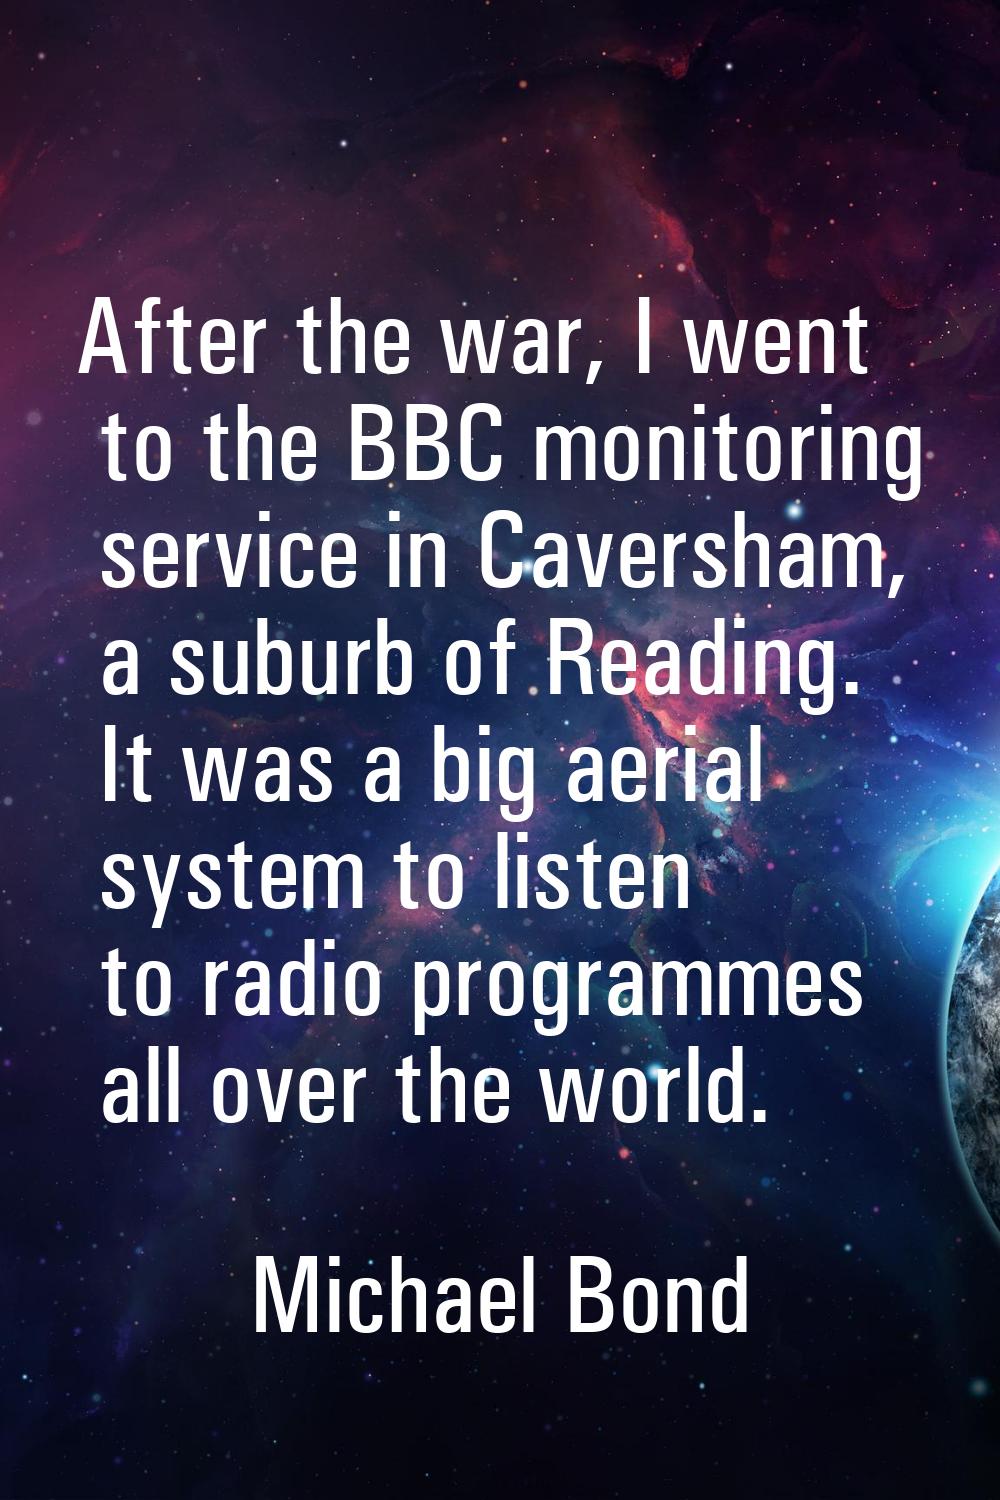 After the war, I went to the BBC monitoring service in Caversham, a suburb of Reading. It was a big